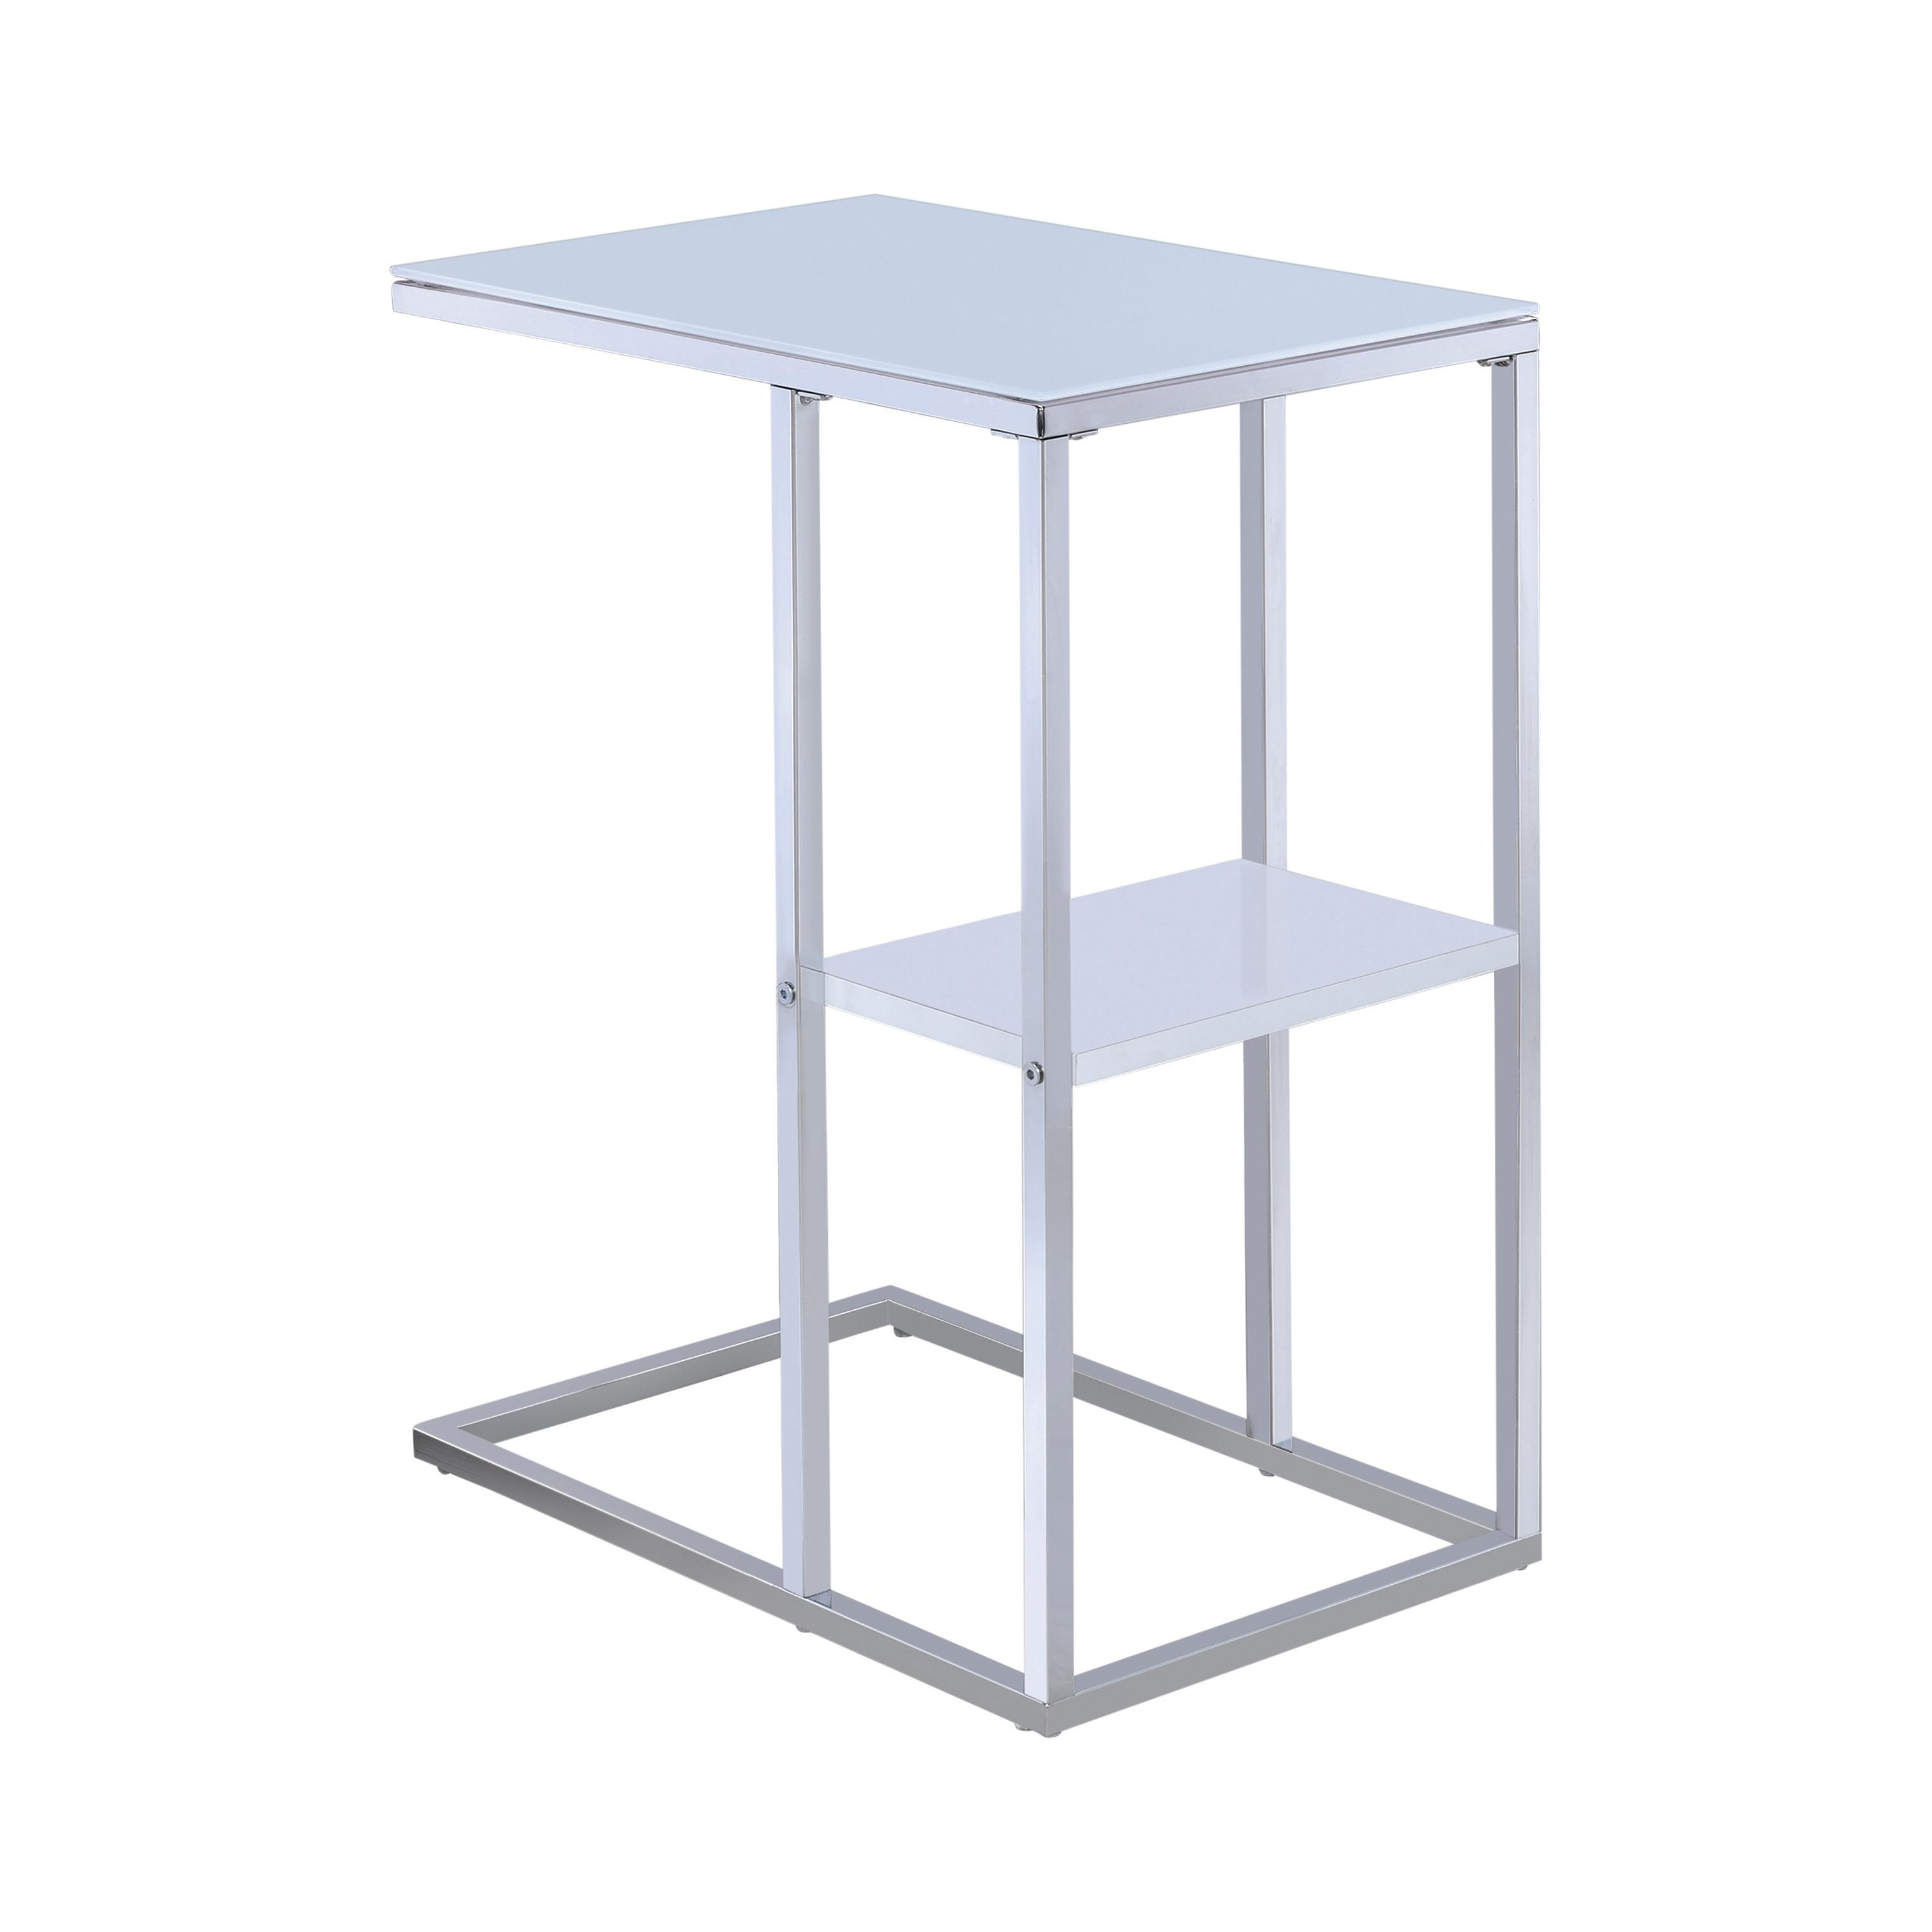 Contemporary Snack Table 904018 904018 in Chrome, White 